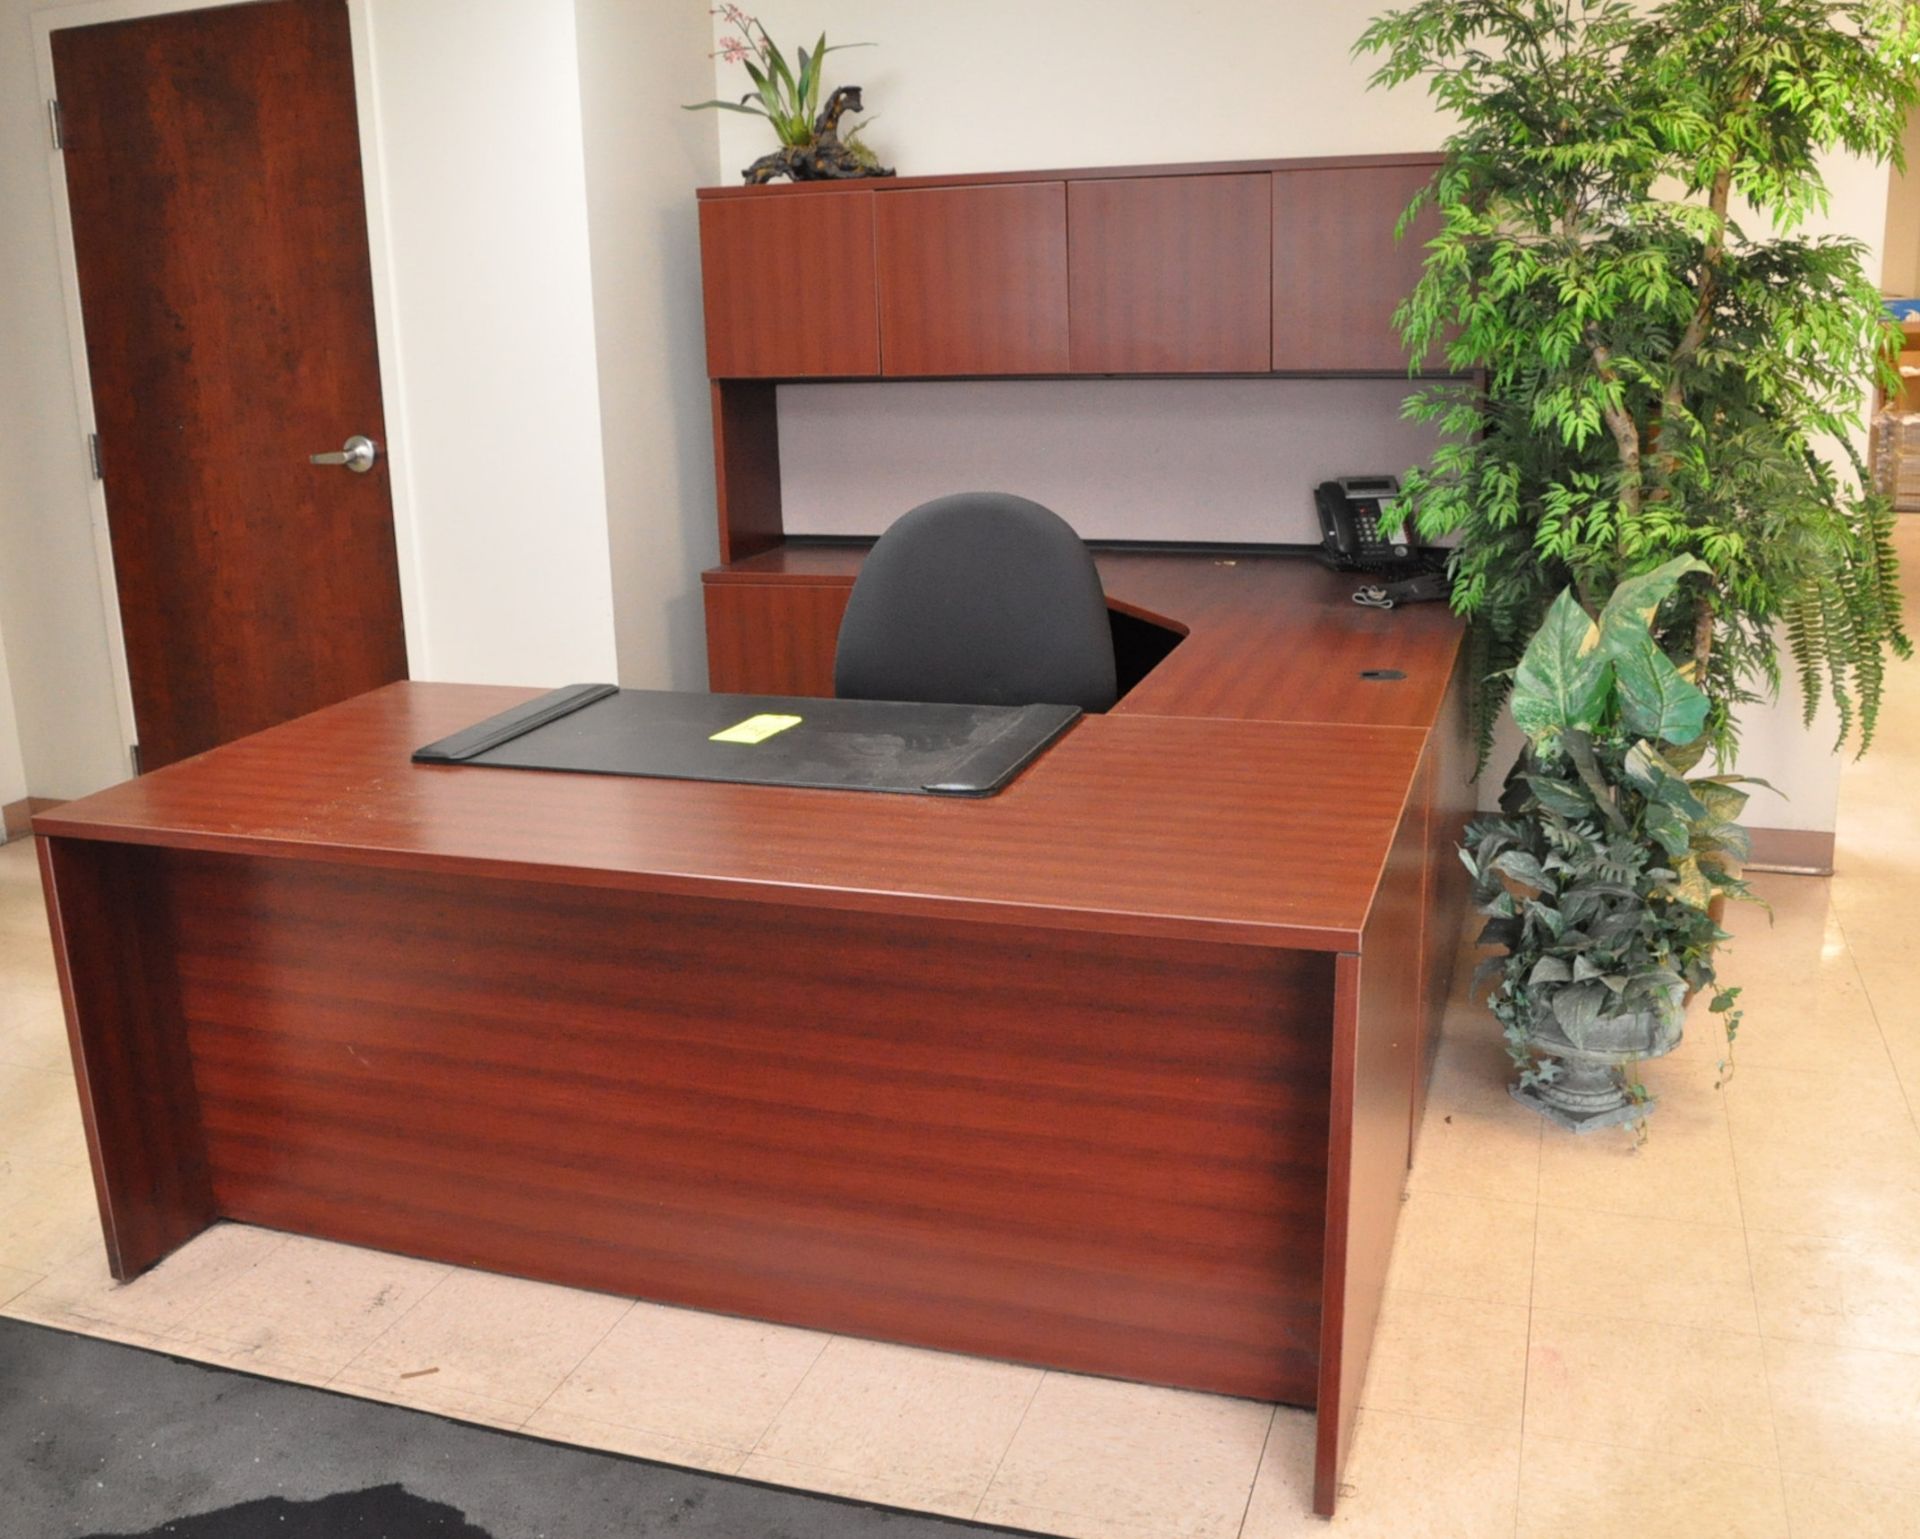 Lot-(1) Desk, (1) Chair and (3) Plants in Reception Area